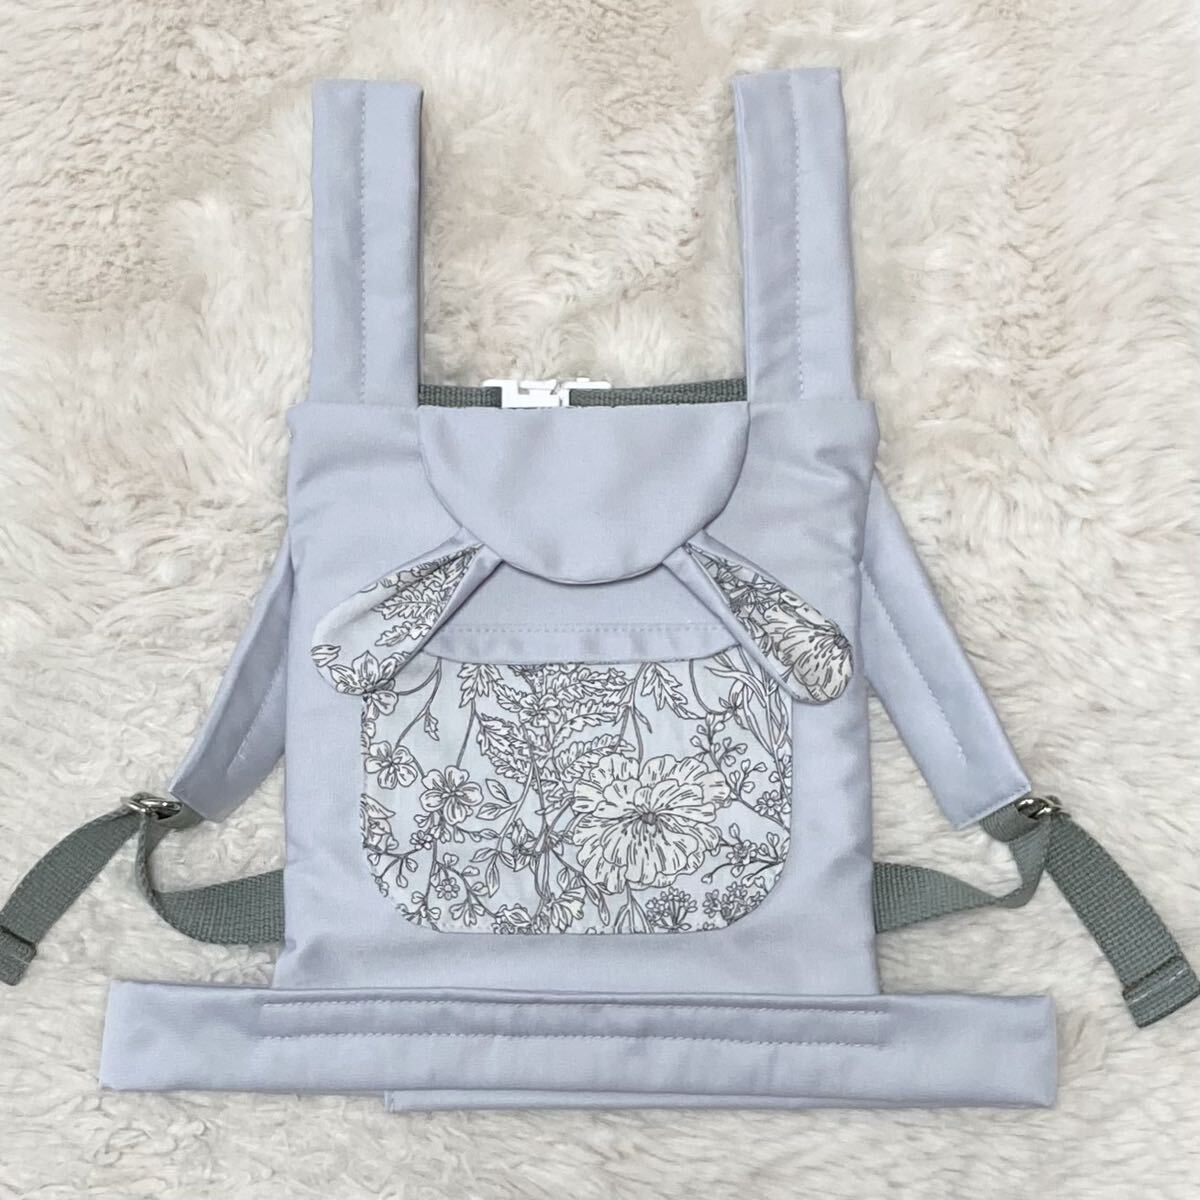  monochrome floral print × gray .. ear L go baby manner ... string back position baby carrier meru Chan reminso Randall carrier hand made 